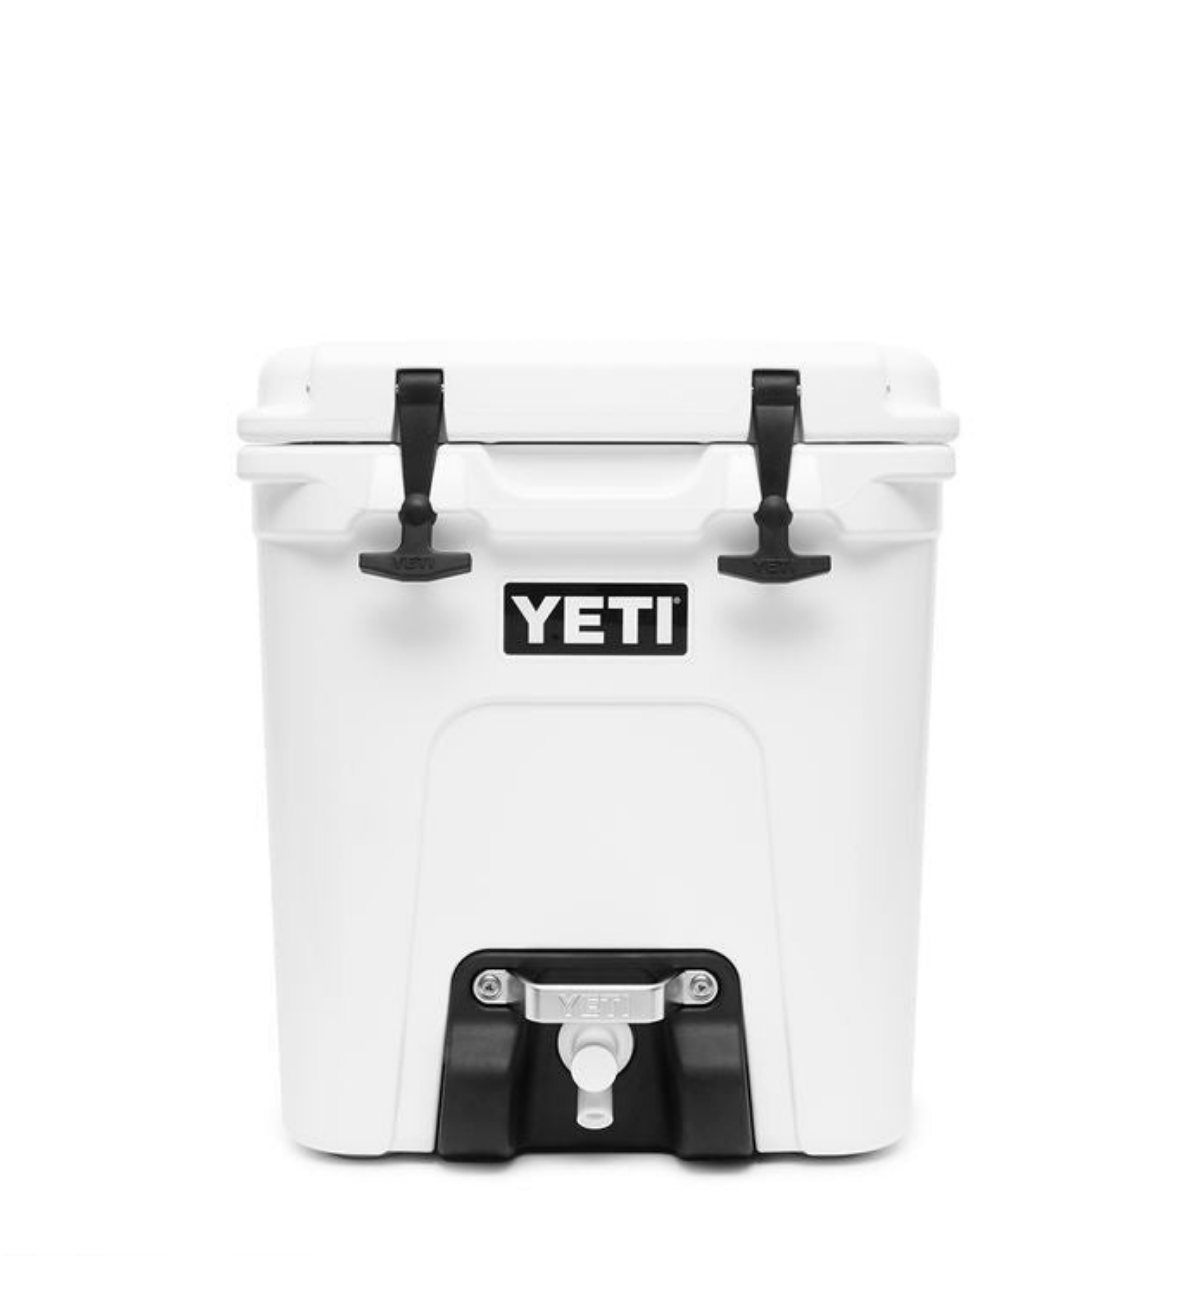 YETI 22.7L Water Cooler – Bright and Shine – Bright and Shine